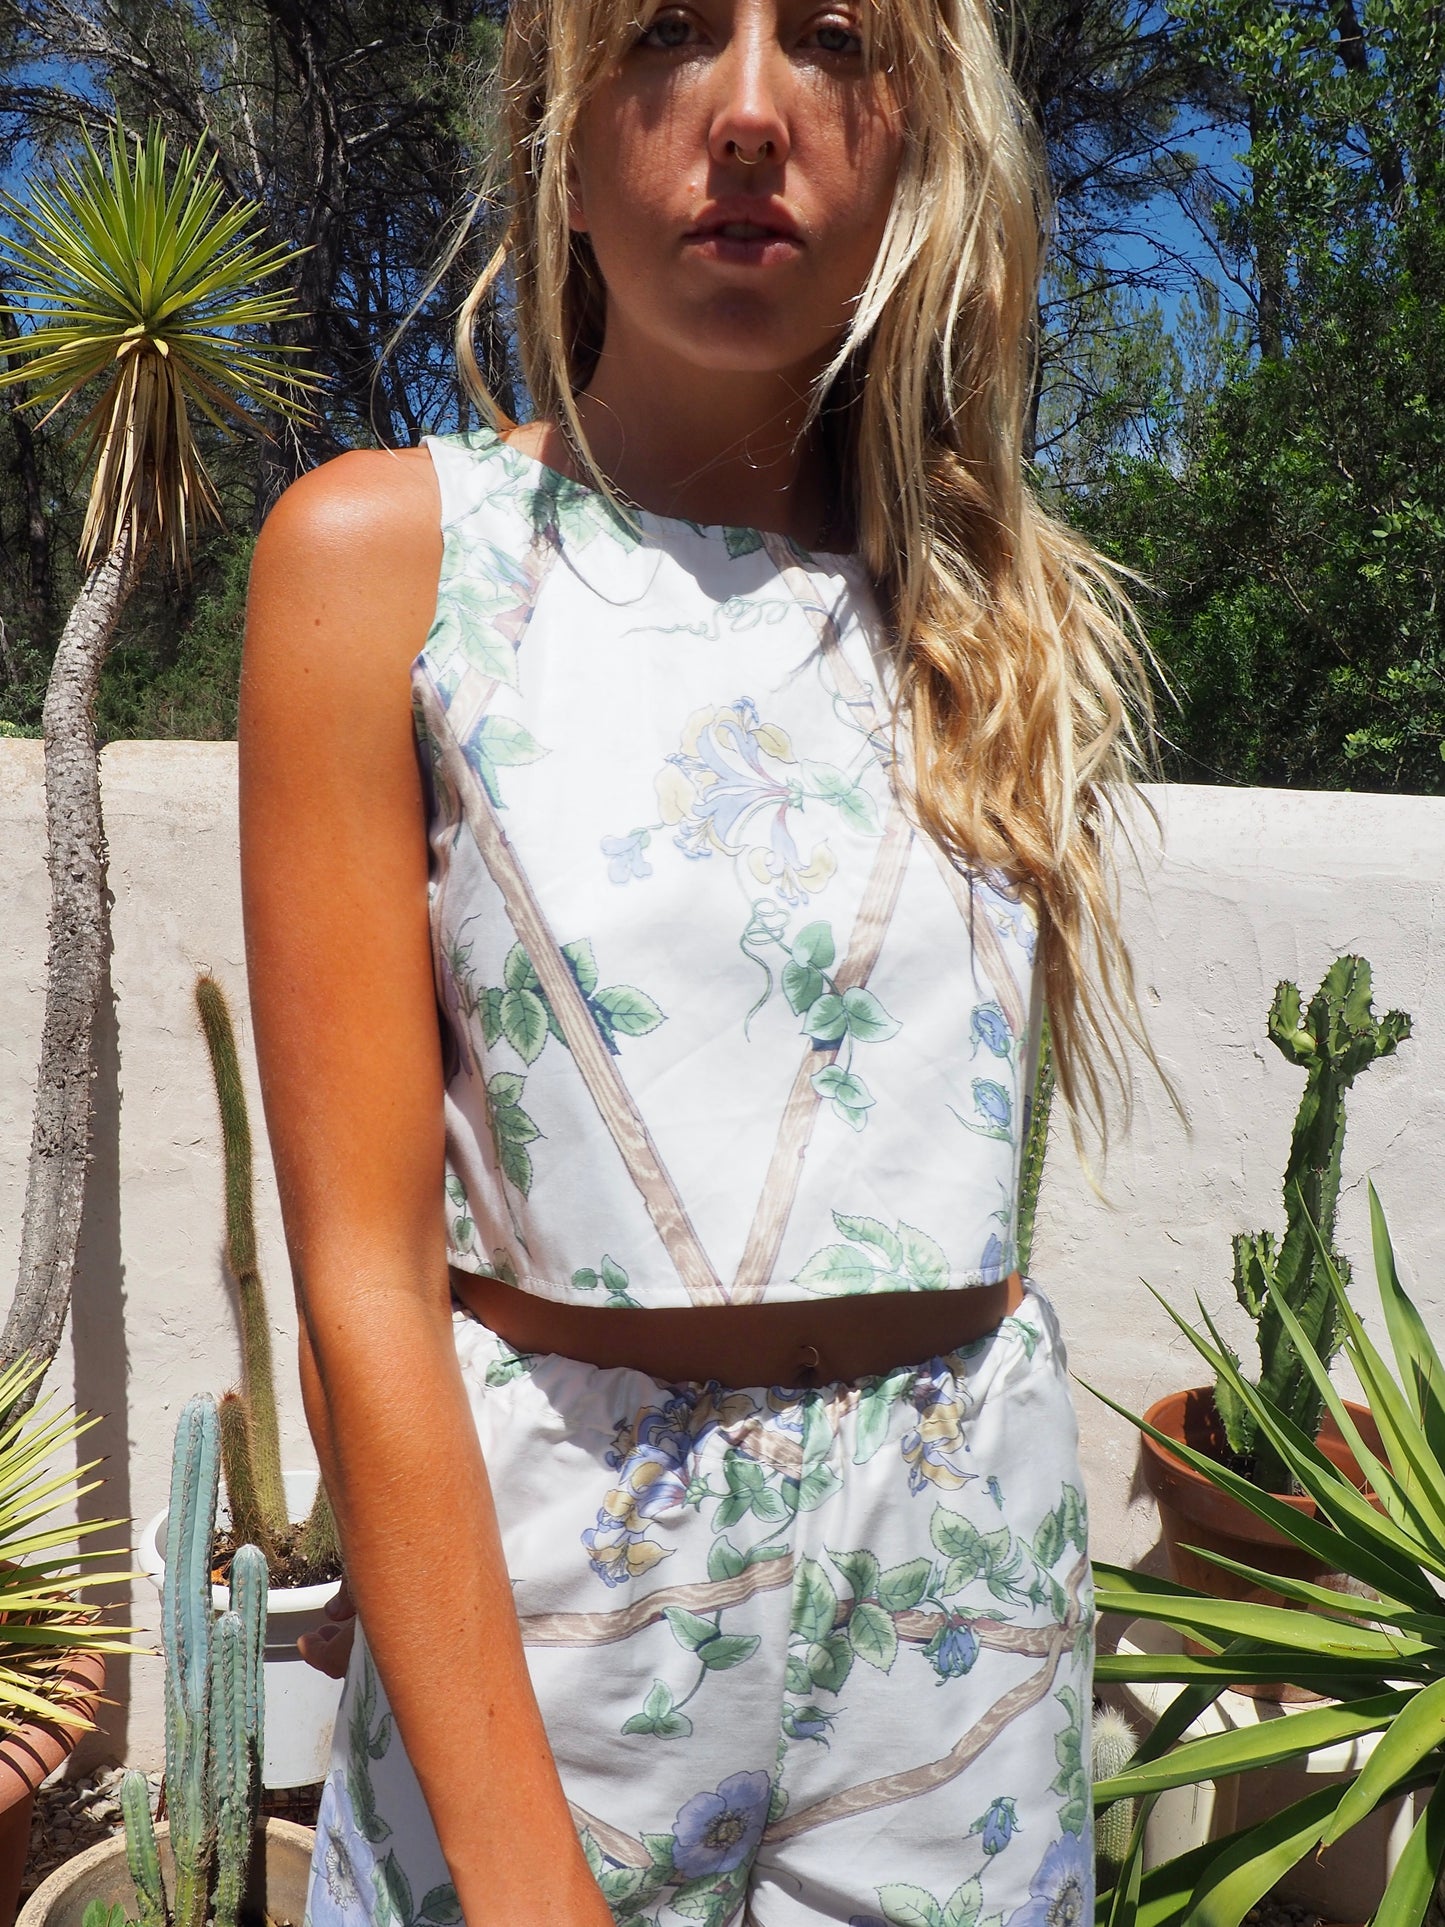 Up-cycled vintage garden floral printed textiles in white and blue crop top by Vagabond Ibiza in